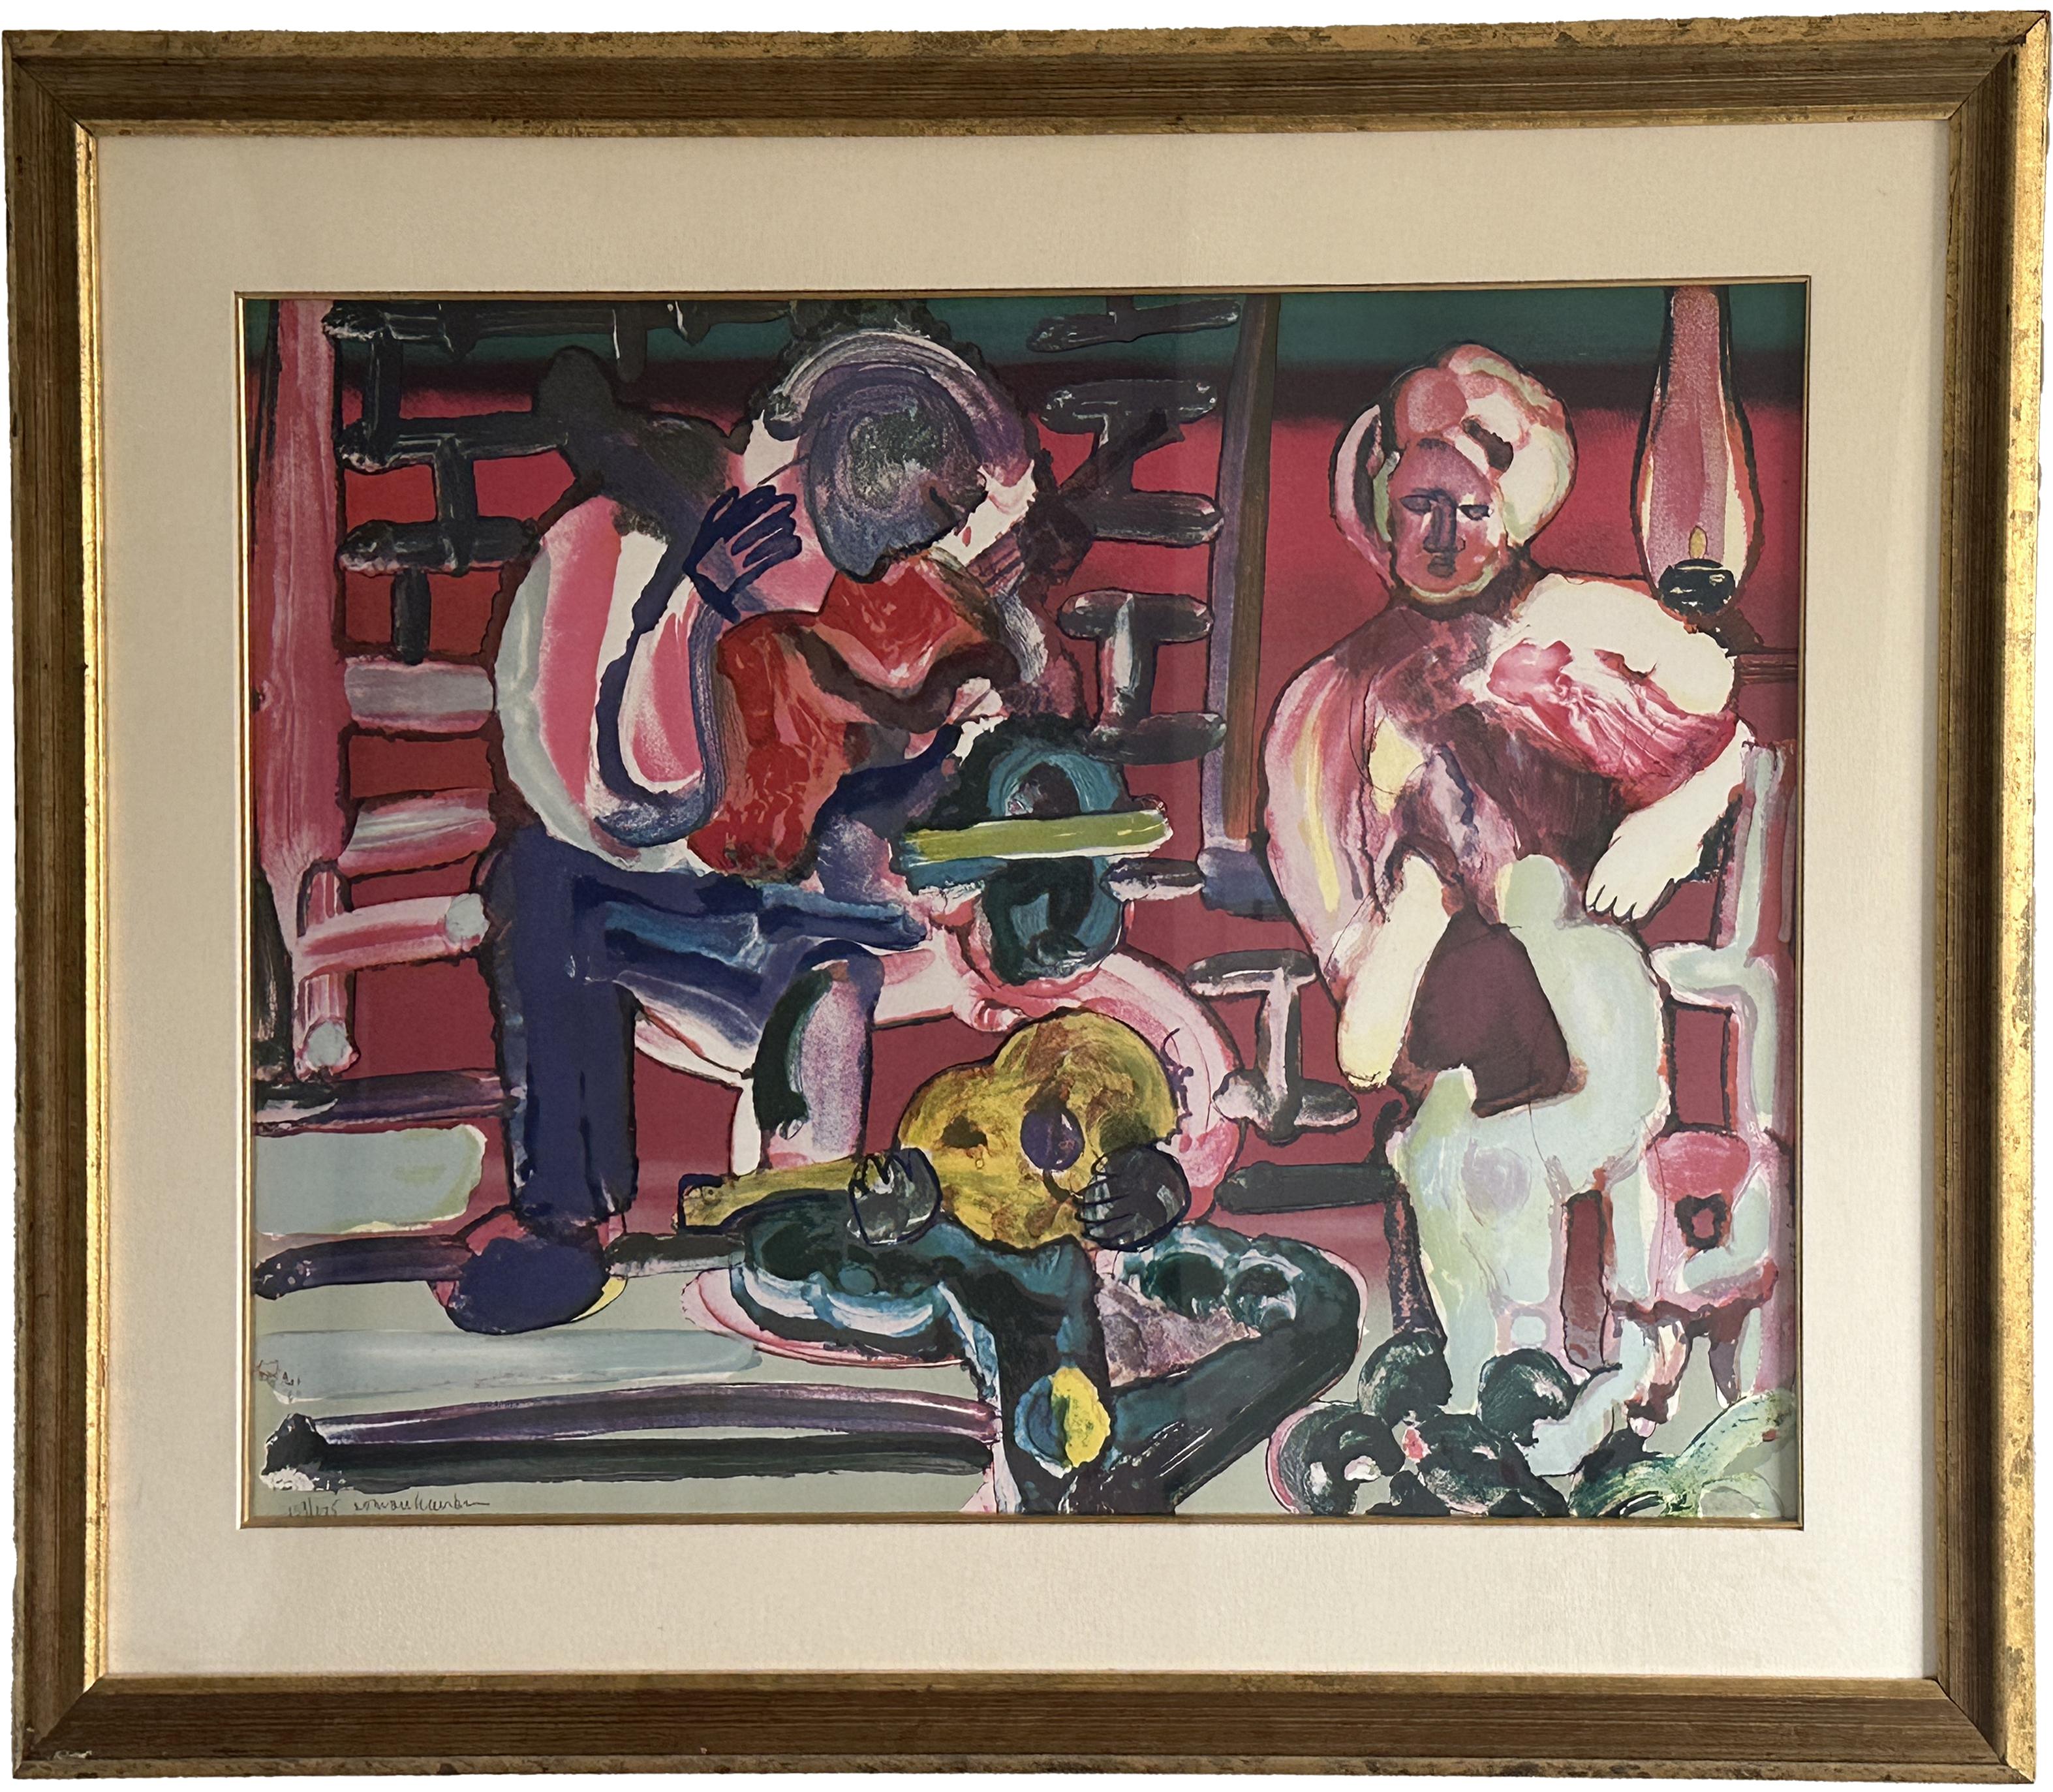 Romare Bearden Abstract Print - Louisiana Serenade 1979 Signed Limited Edition Lithograph